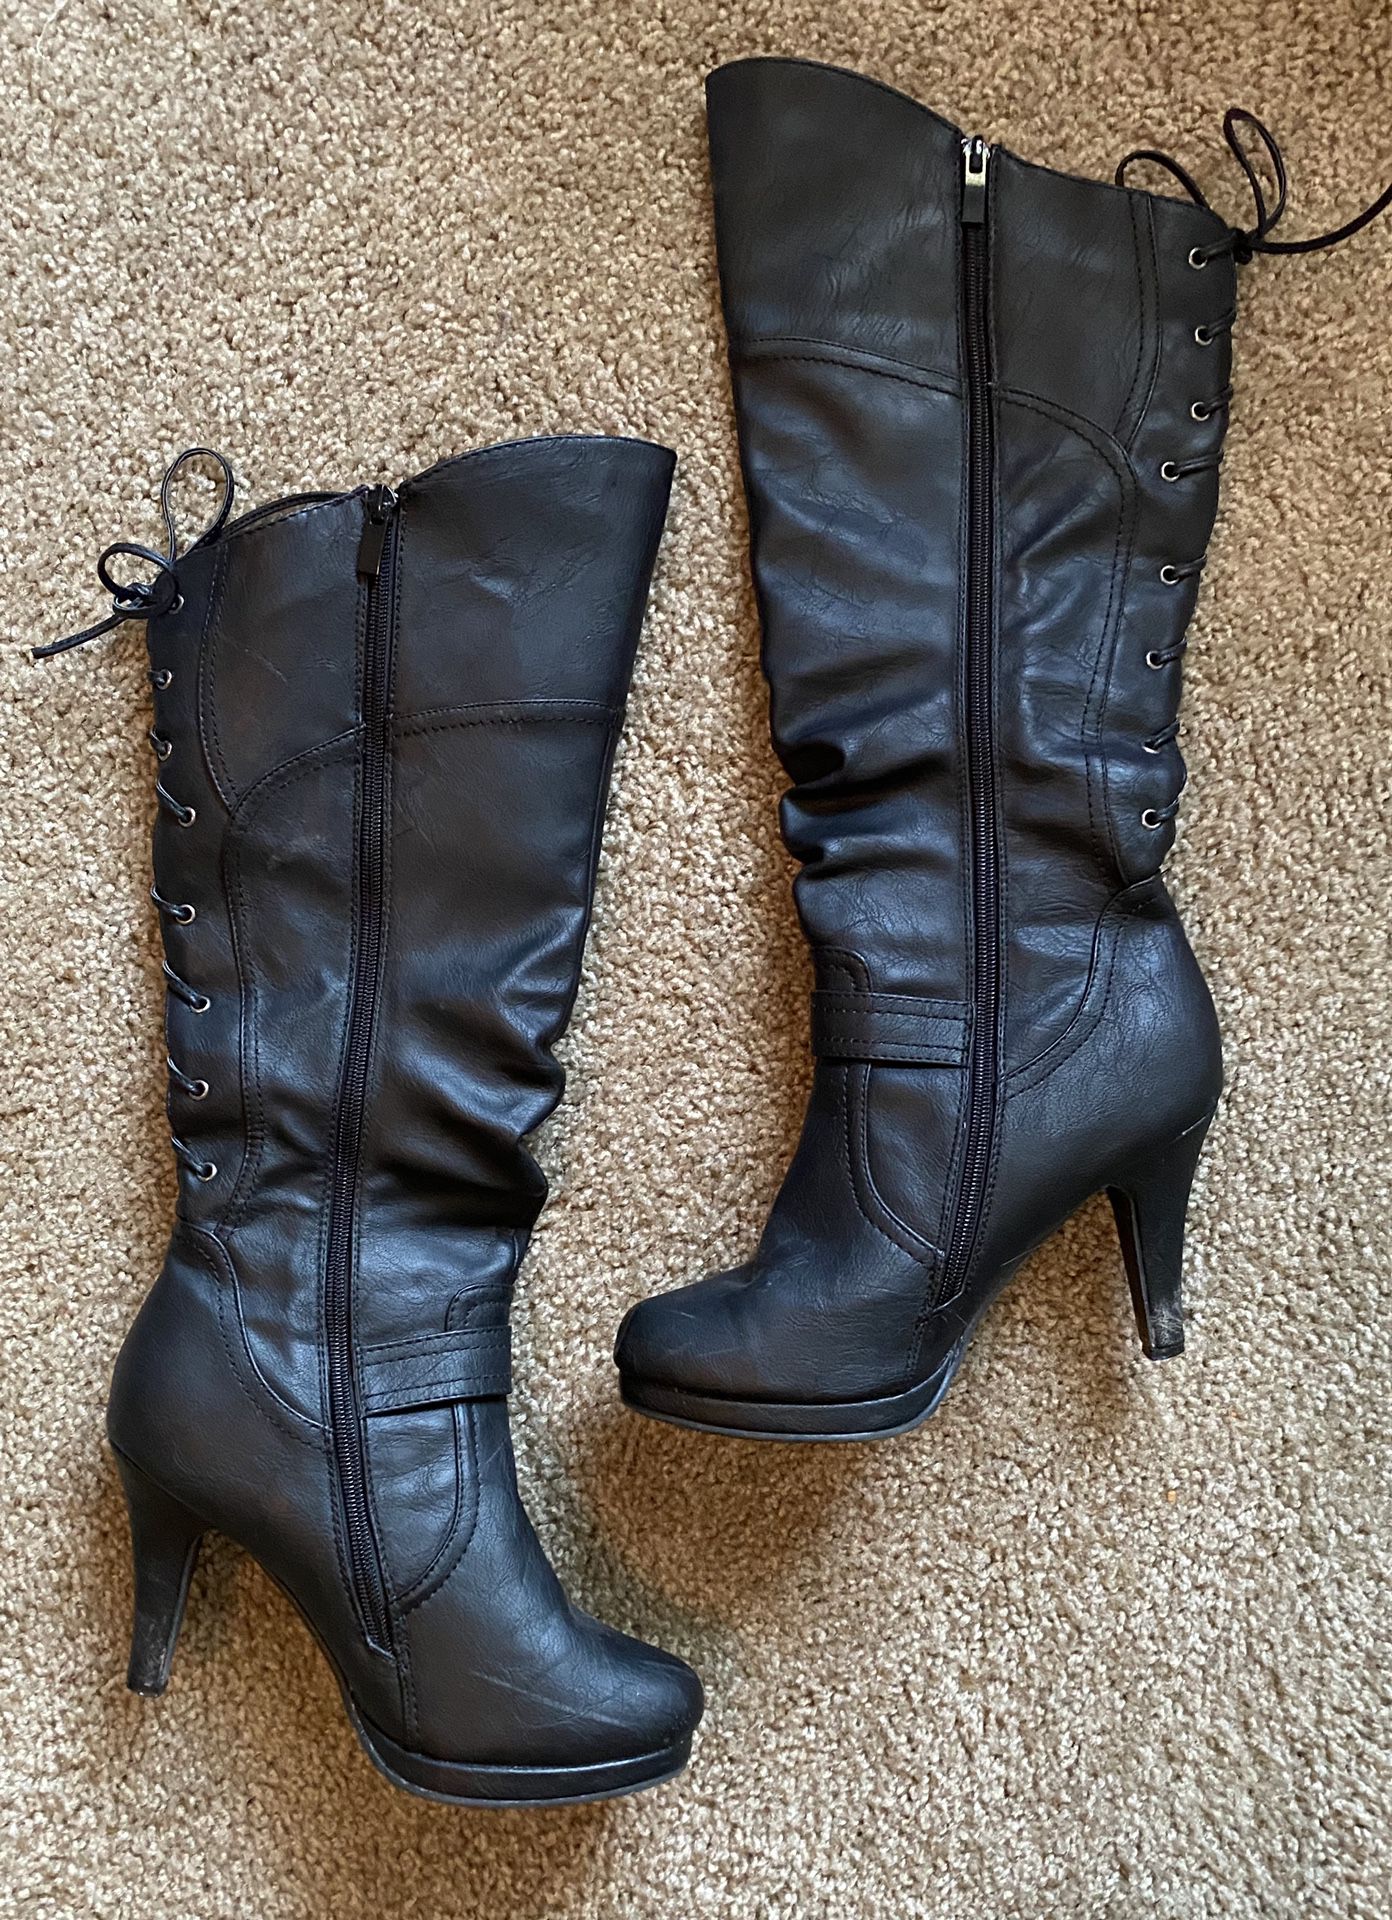 Boots size 8.5 New